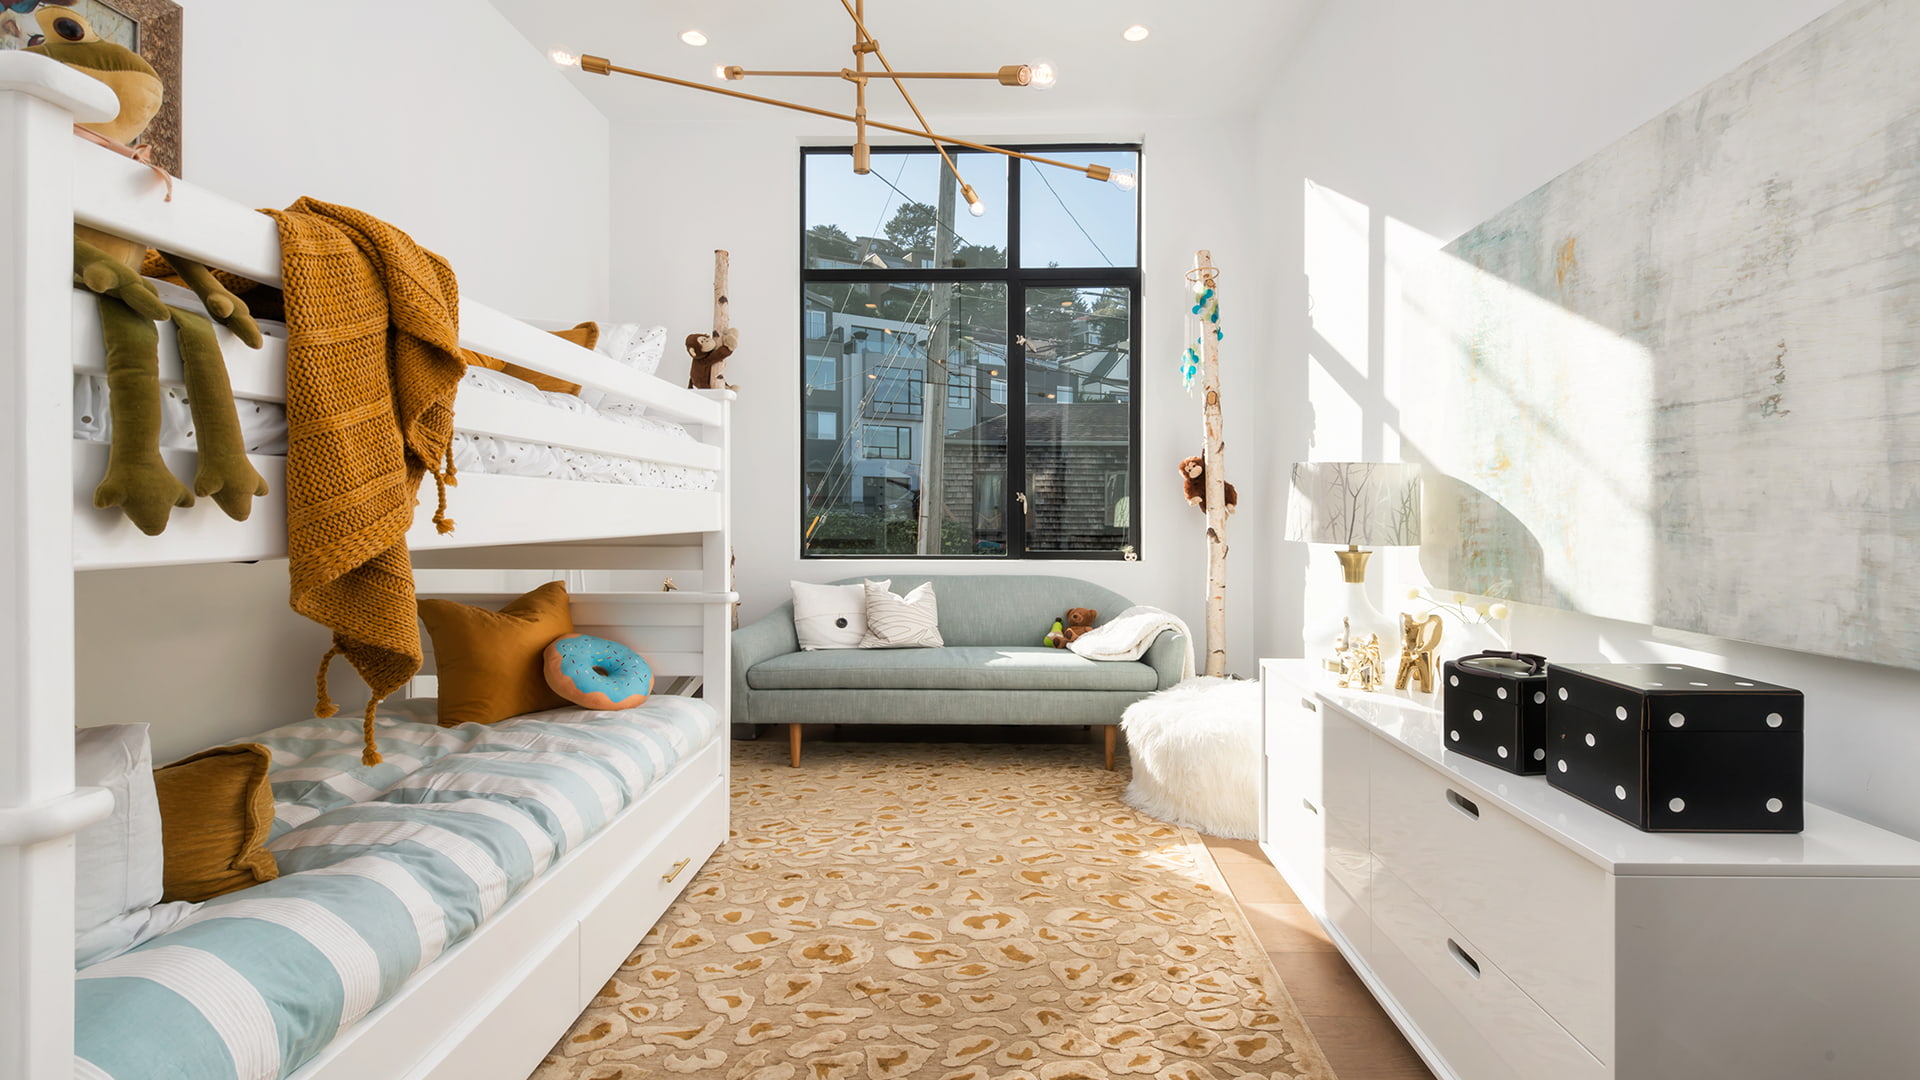 A child's bedroom with modern light fixtures, modern art, and orange-accent decor